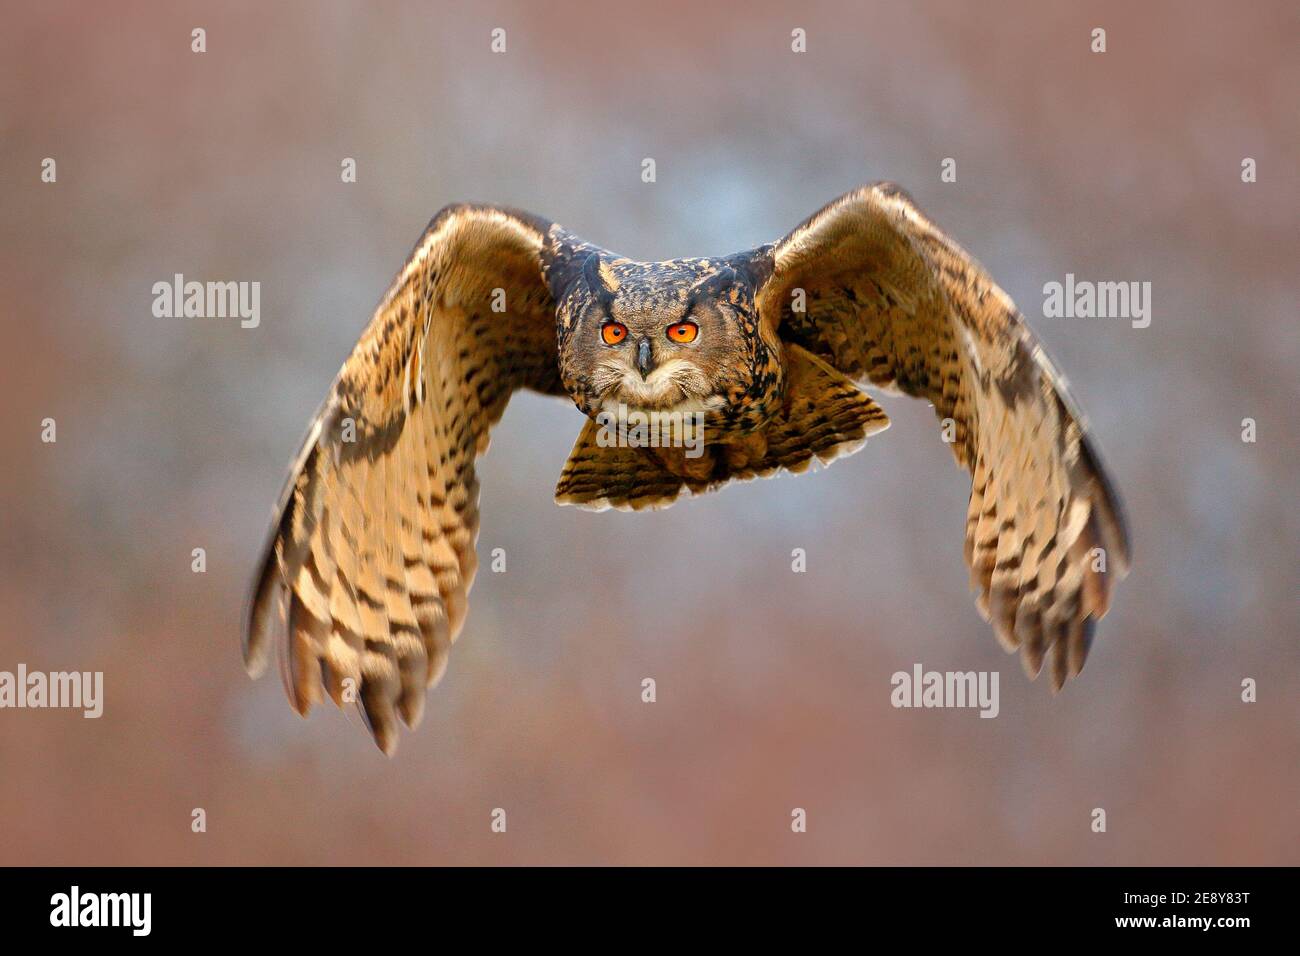 Eagle owl landing on snowy tree stump in forest. Flying Eagle owl with open wings in habitat with trees. Action winter scene from nature. Stock Photo